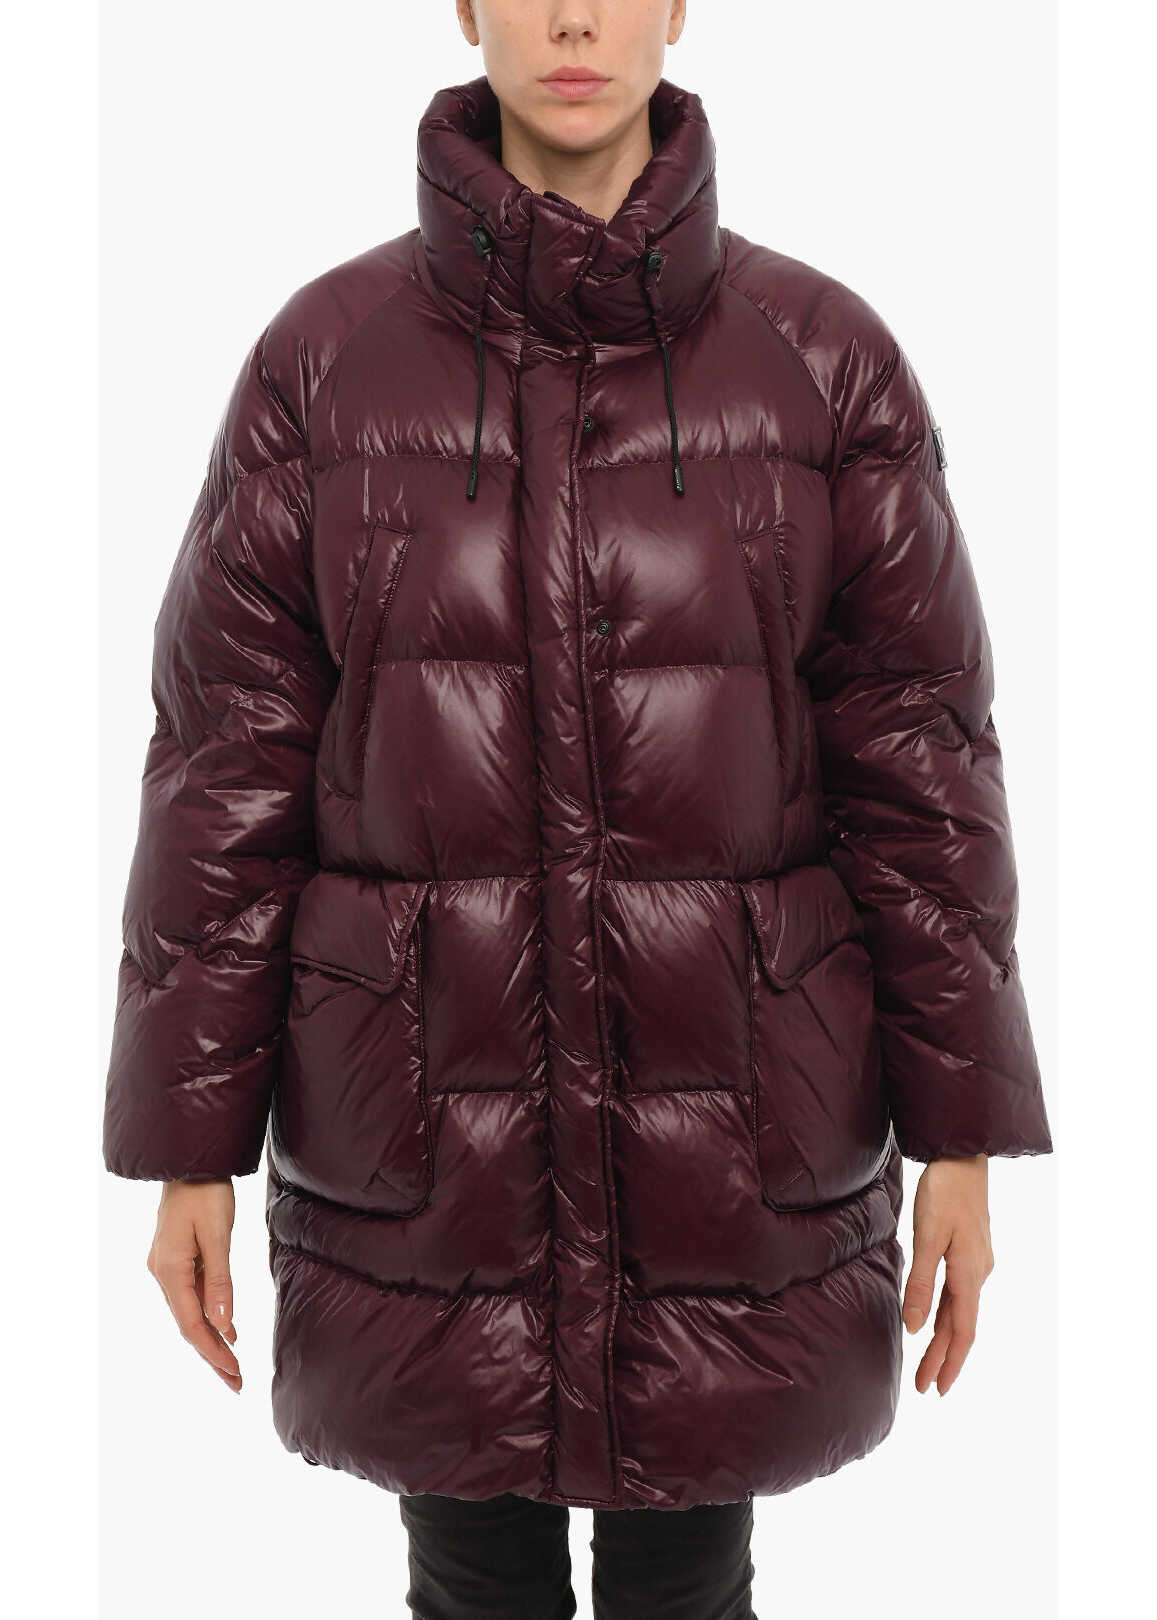 Woolrich Solid Color Packable Birch Down Jacket Burgundy